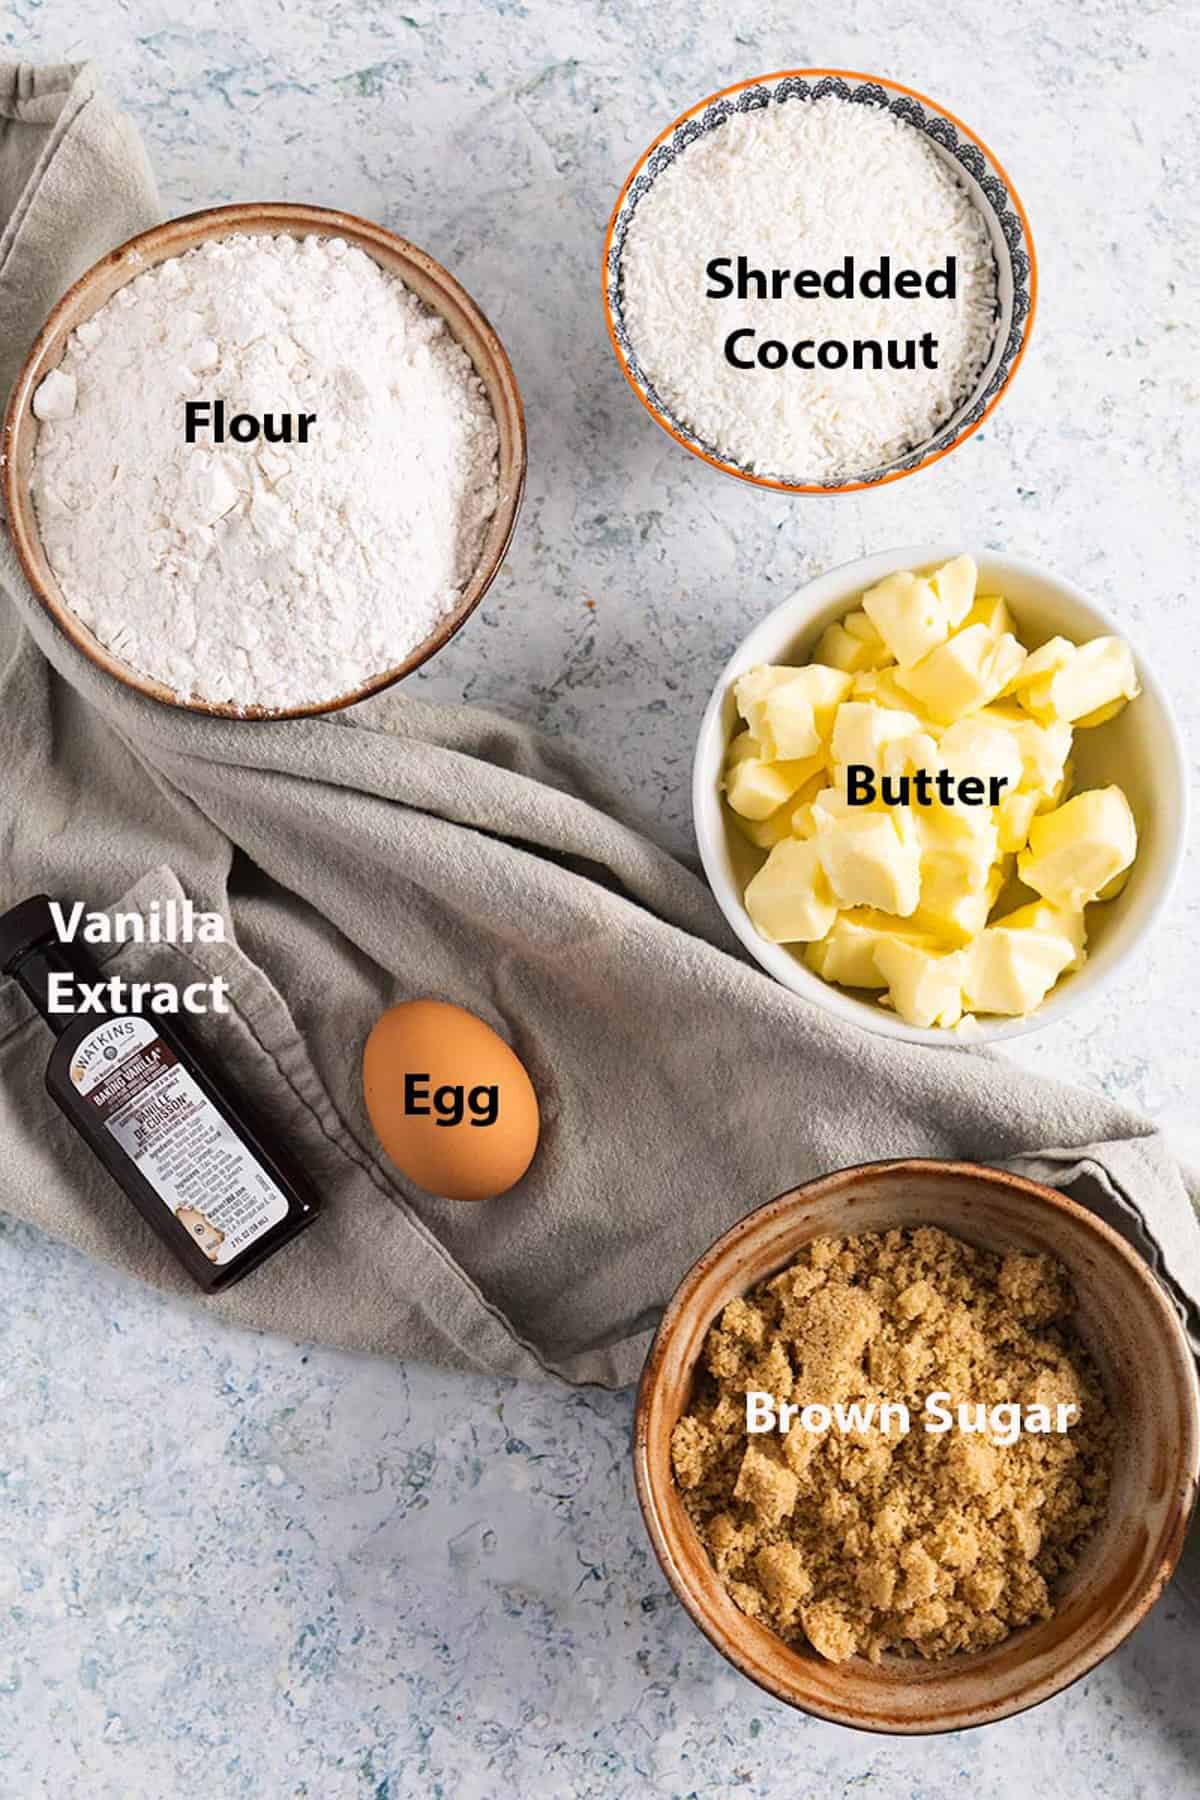 top view of ingredients to make coconut sugar cookies: flour, shredded coconut, butter, egg, vanilla extract and brown sugar.